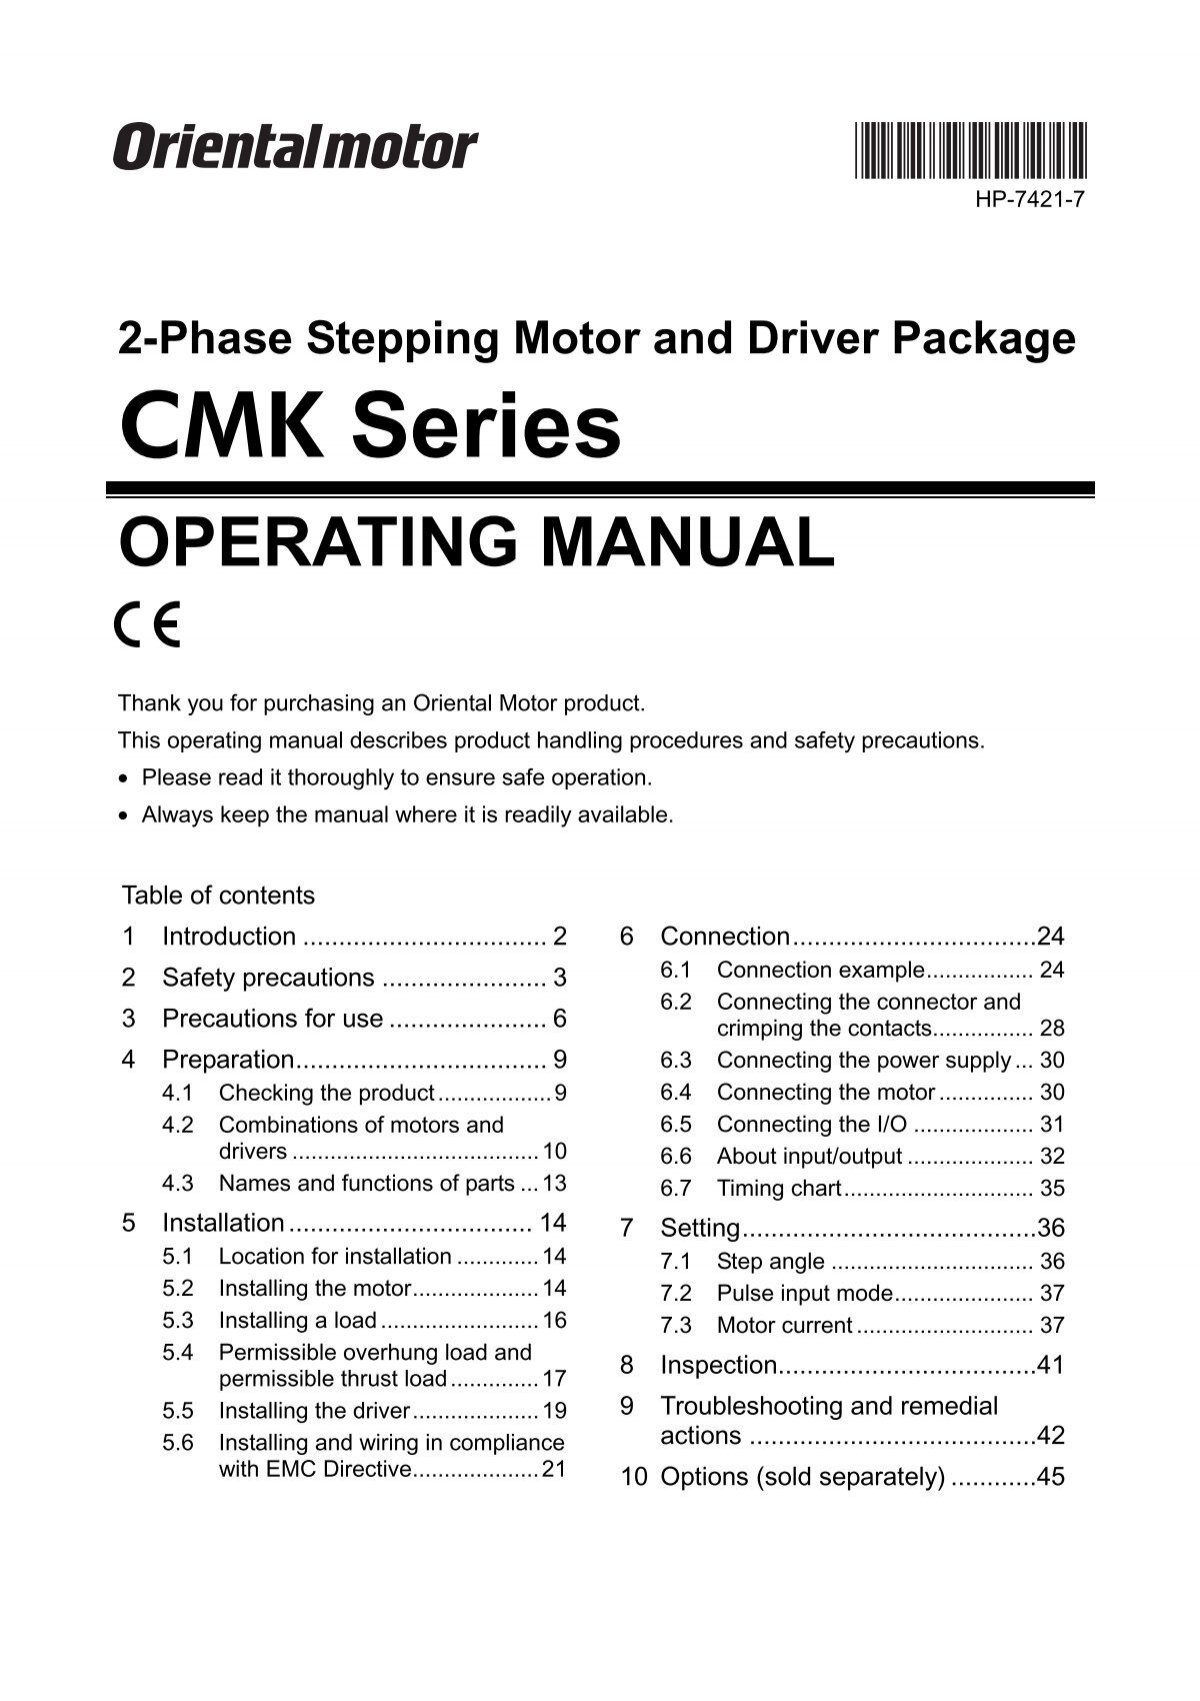 2-Phase Stepping Motor and Driver Package CMK - Oriental Motor